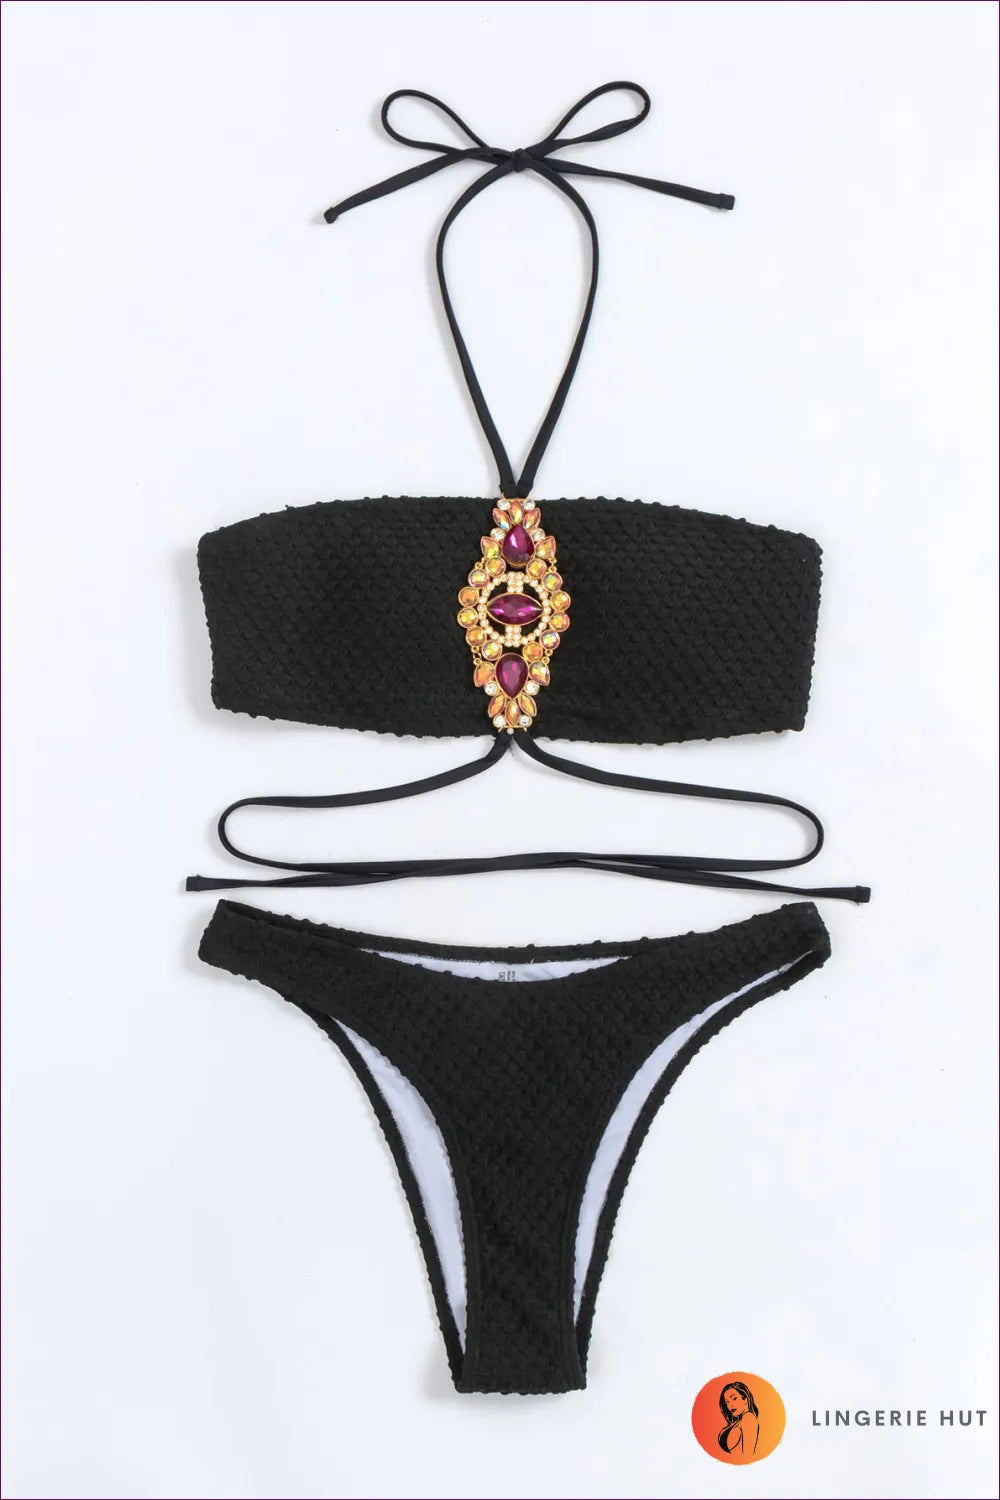 Embrace Beachside Glamour With Our Dazzling Diamond Chain Split Swimsuit. Radiate Confidence And Make